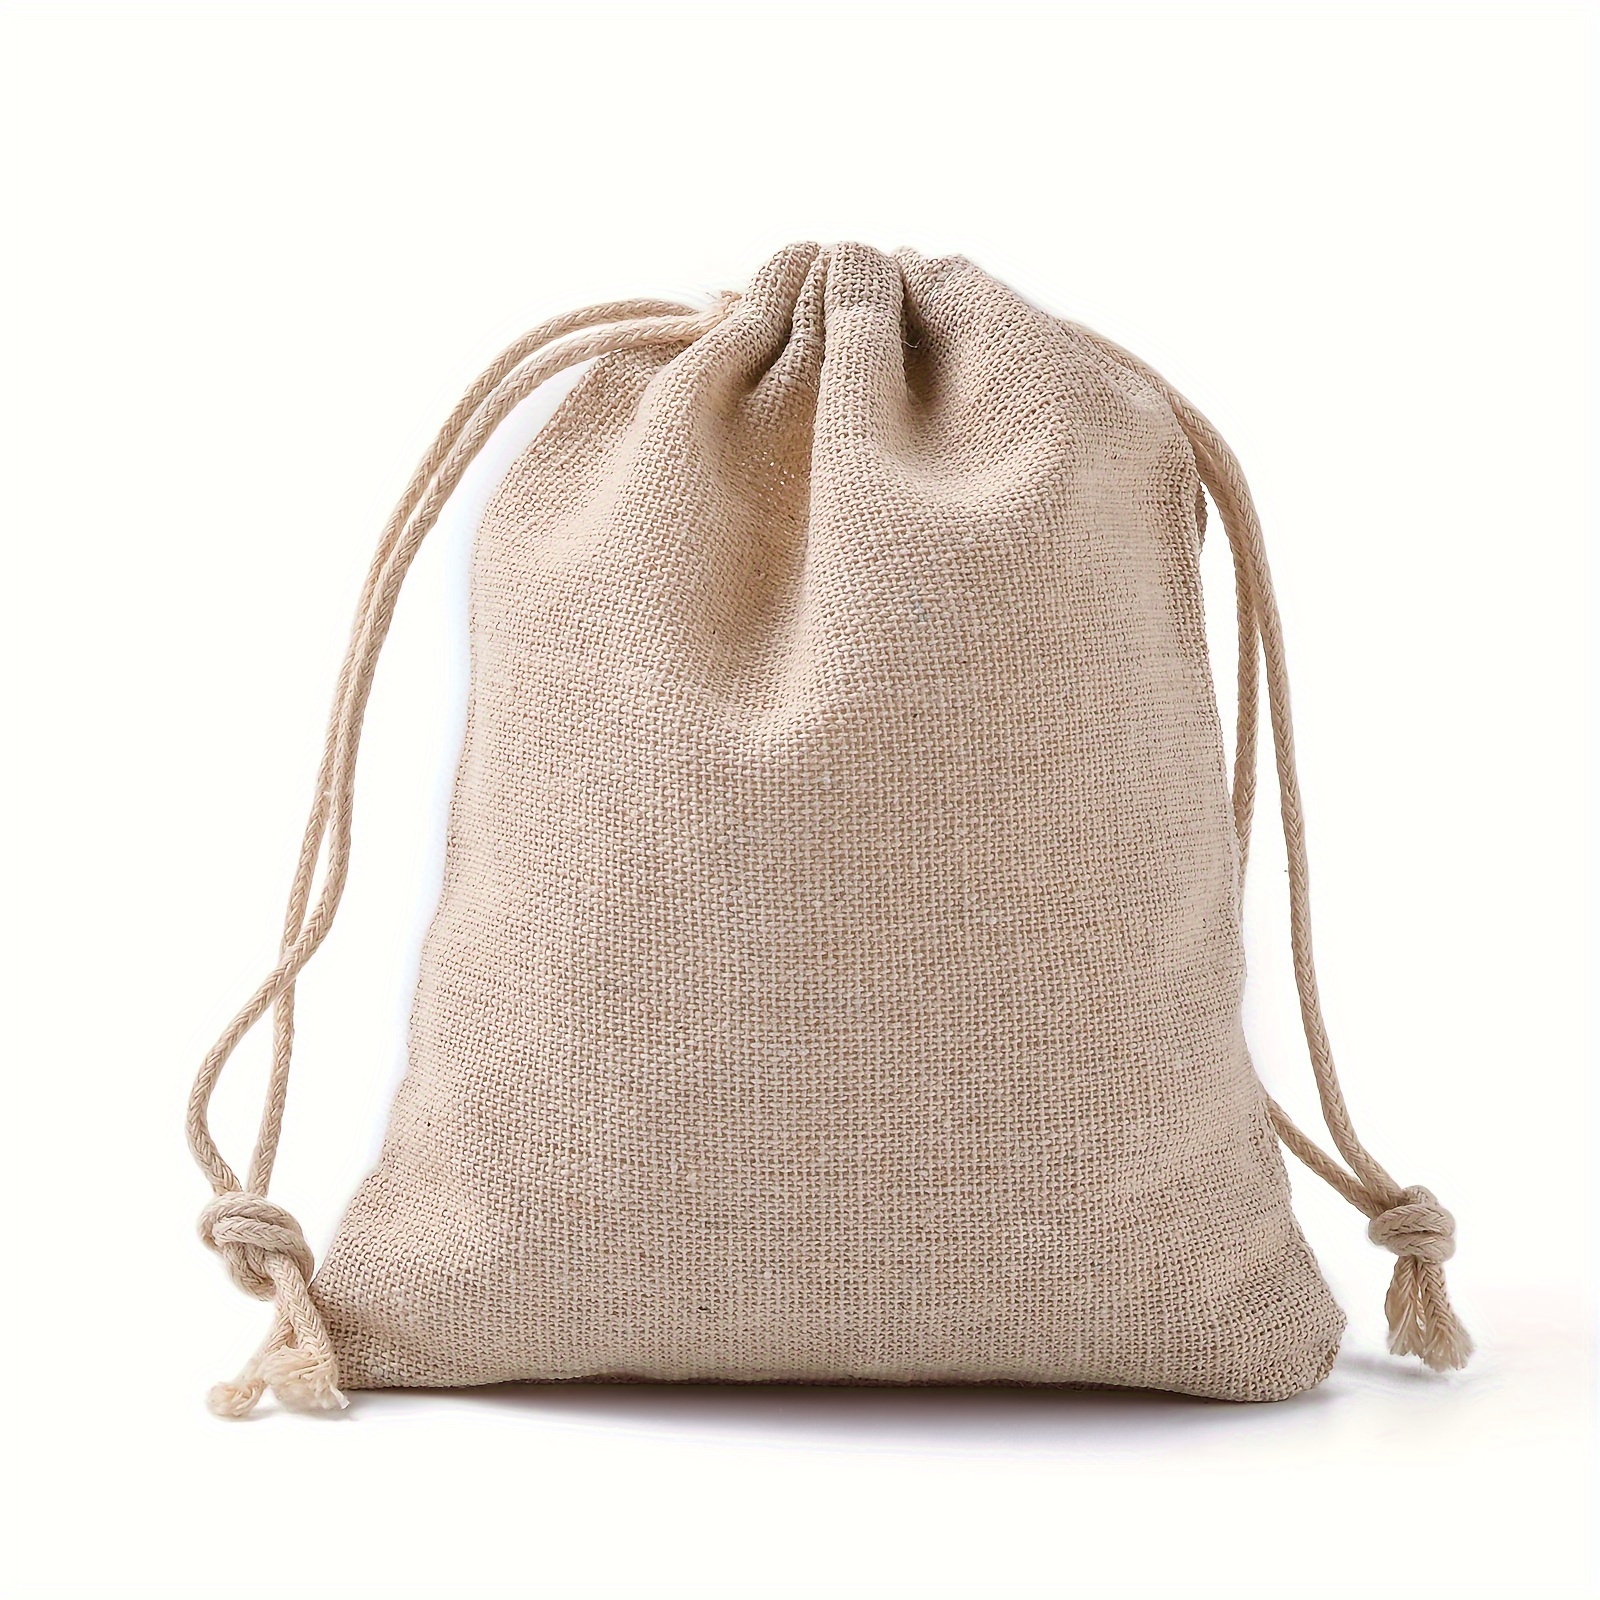 10pcs Cloth Jute Bag Sack Cotton Bag Drawstring Burlap Bag Jewelry Bags  Pouch Little Bags For Jewelry Display Storage Gift Bag